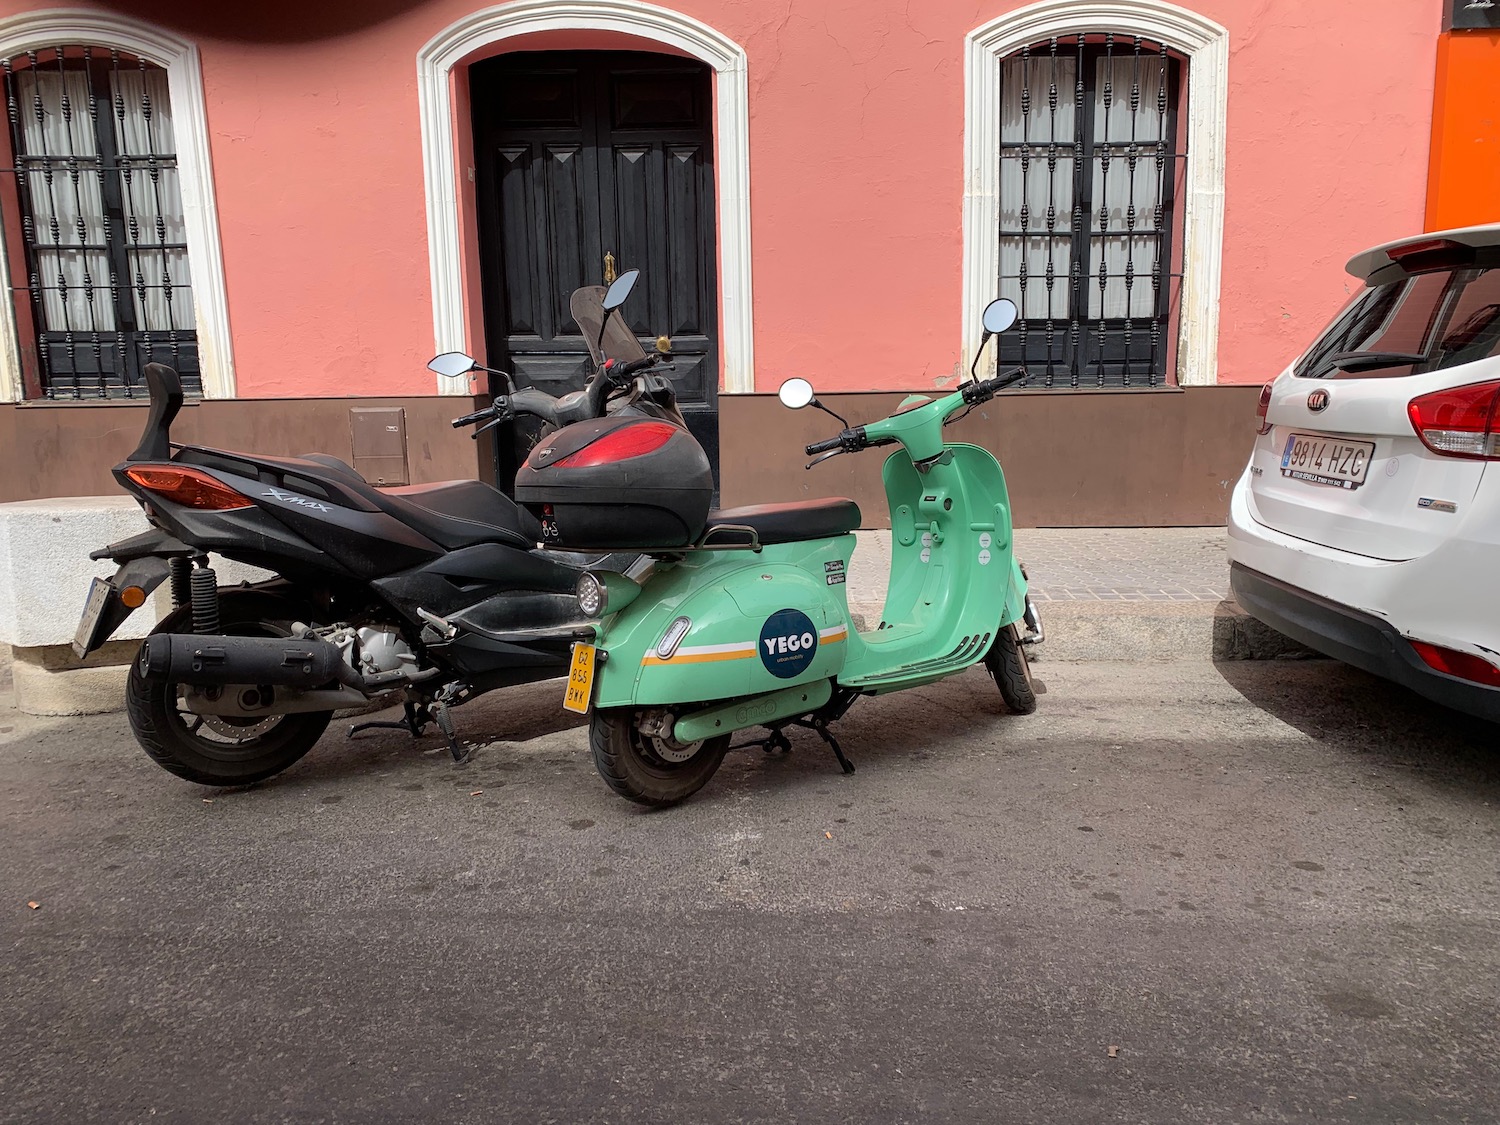 Small, app-based electric rental scooter parked next to a large Moped, a pink building visible in the background.